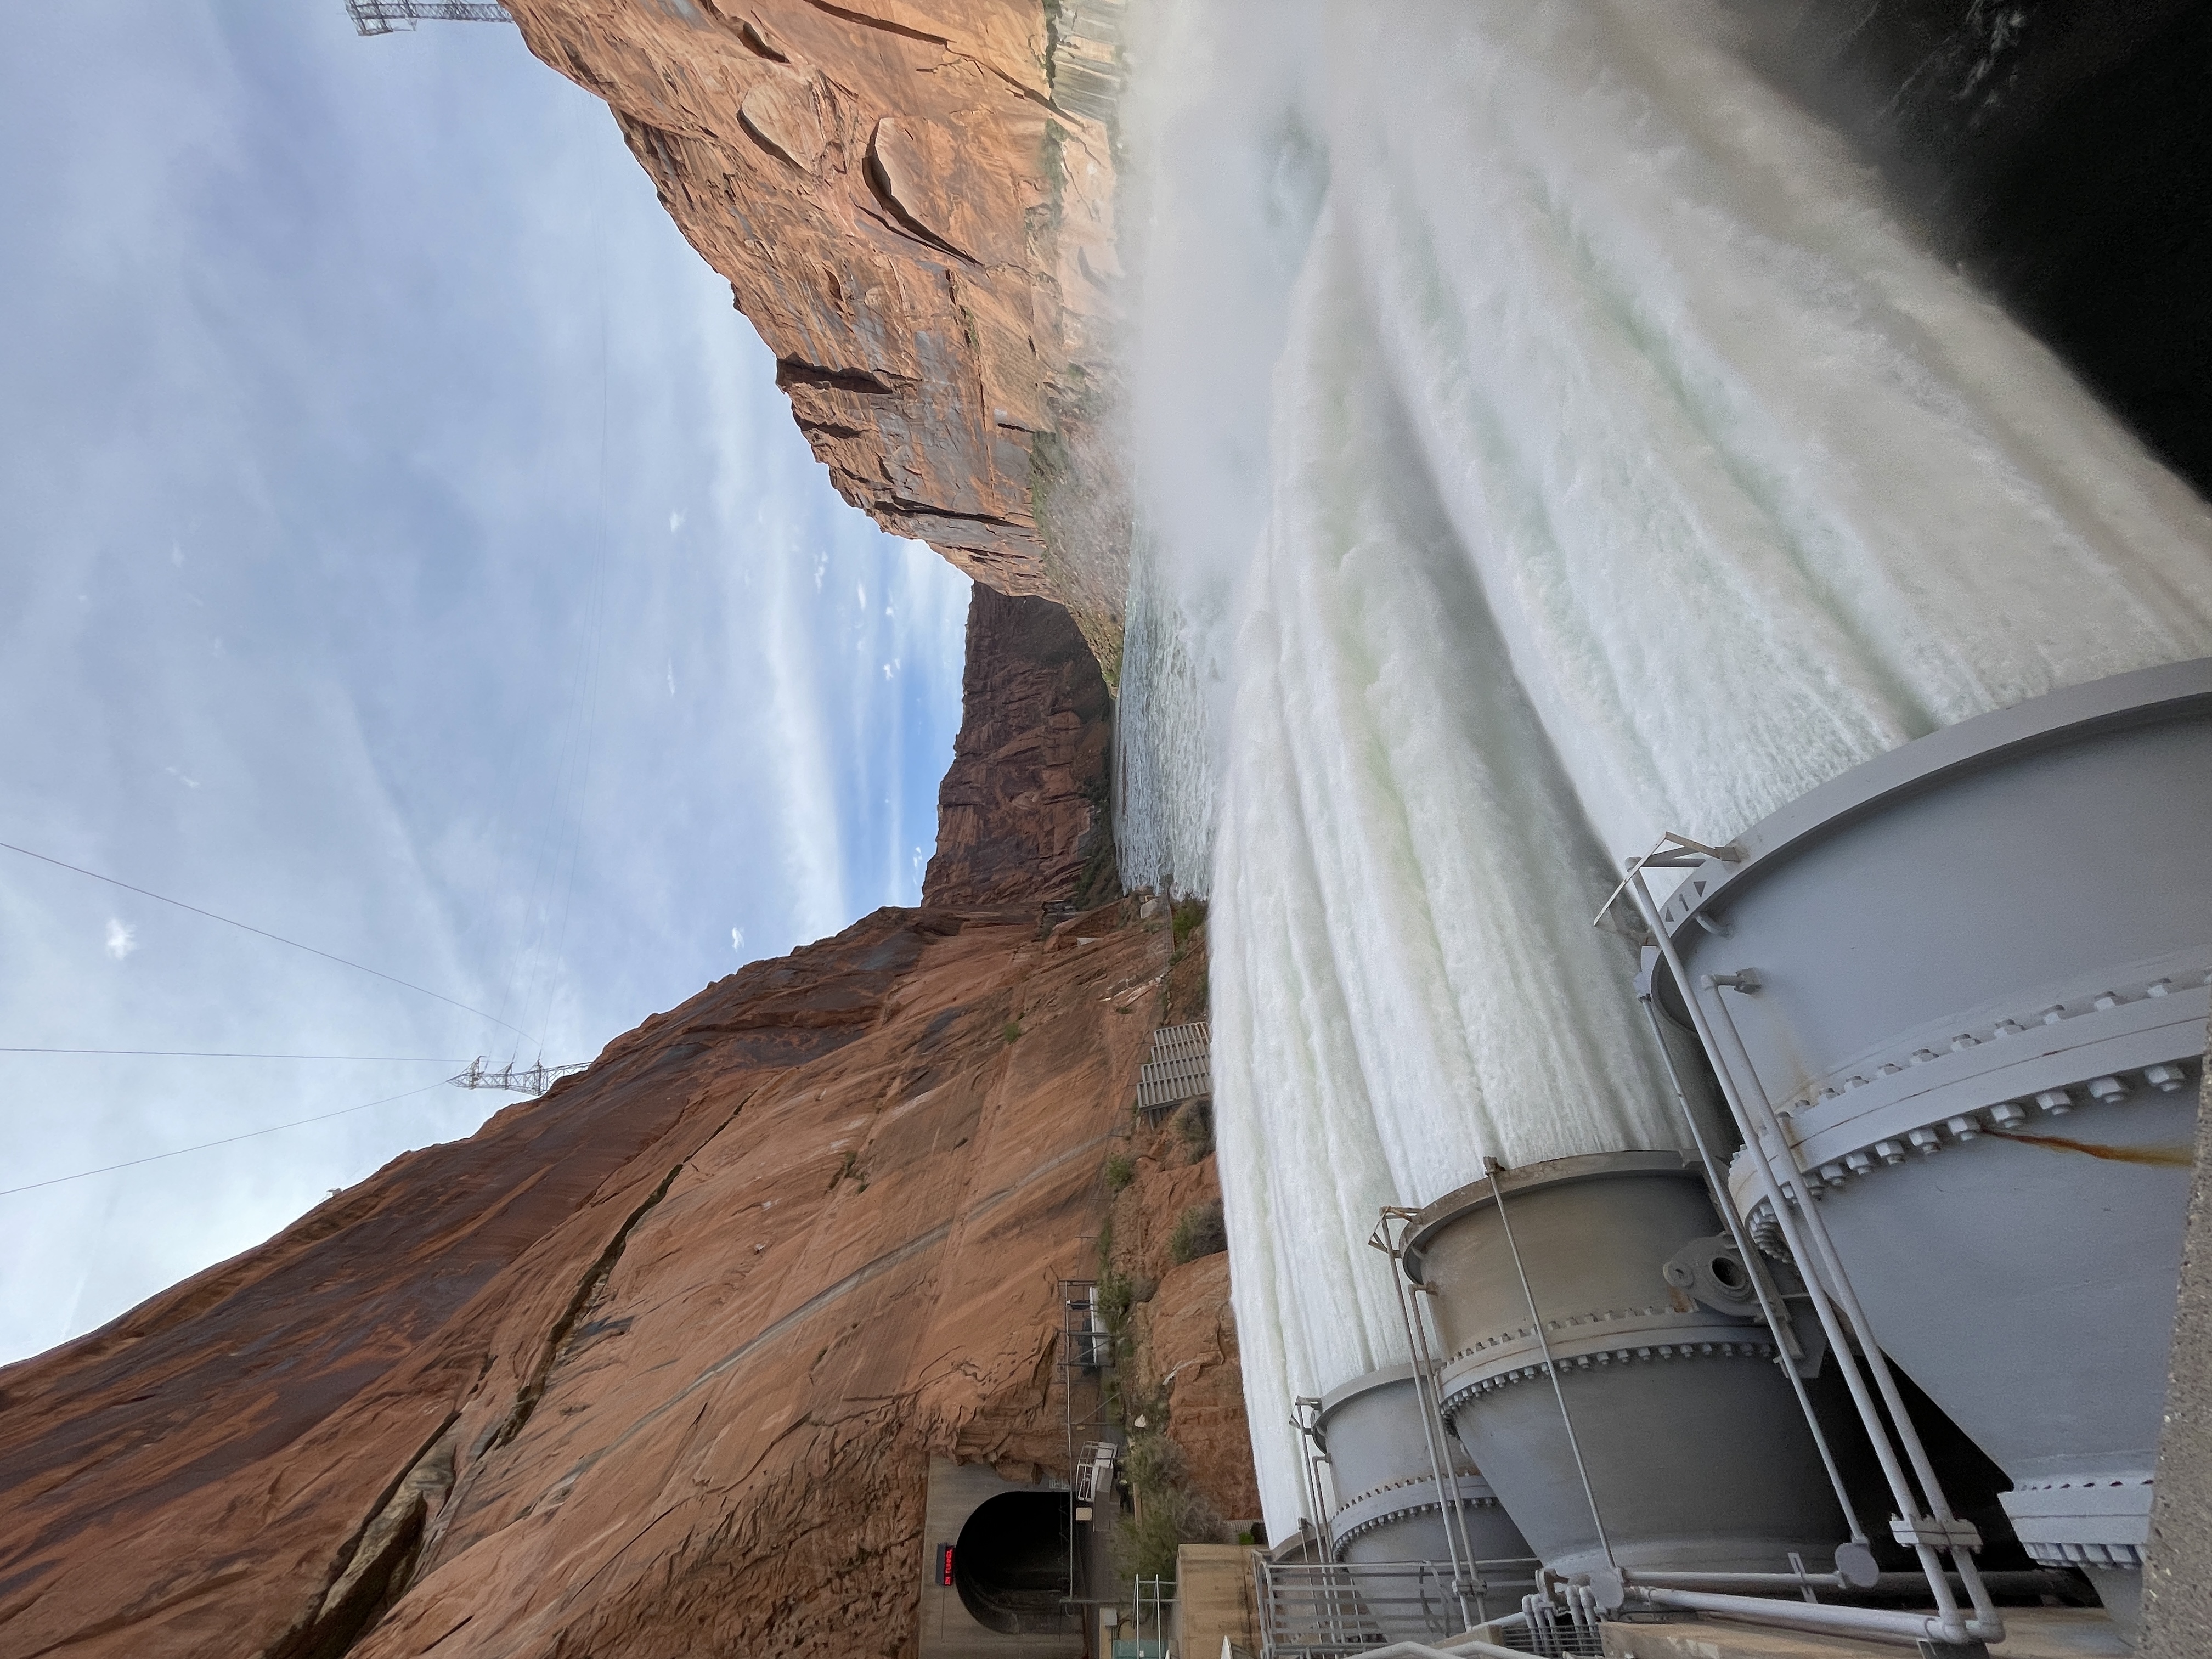 High Flow at Glen Canyon Dam - related image preview